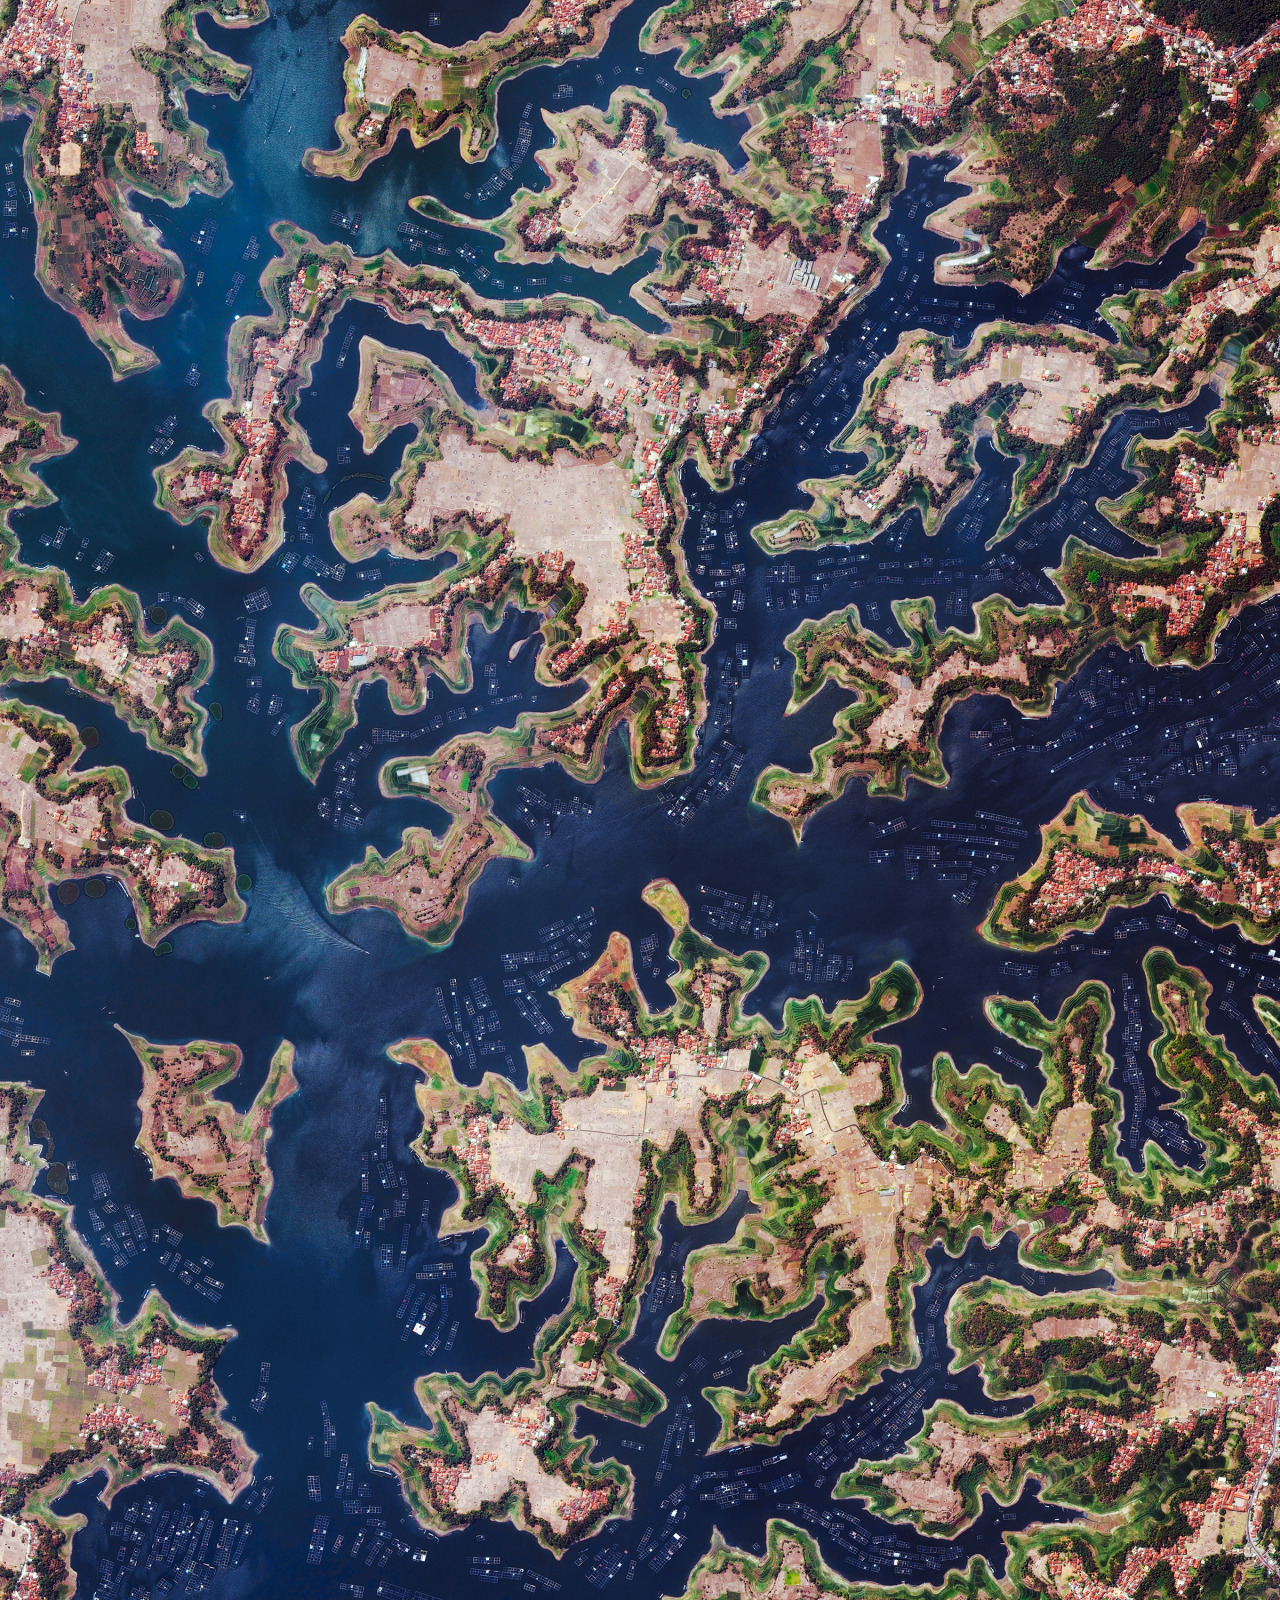 Aquaculture operations are seen along much of the shoreline of the Saguling Dam Reservoir in West Java, Indonesia. Located at the headwater of the Citarum River, the reservoir’s primary purpose is hydroelectric power generation, but it also provides...